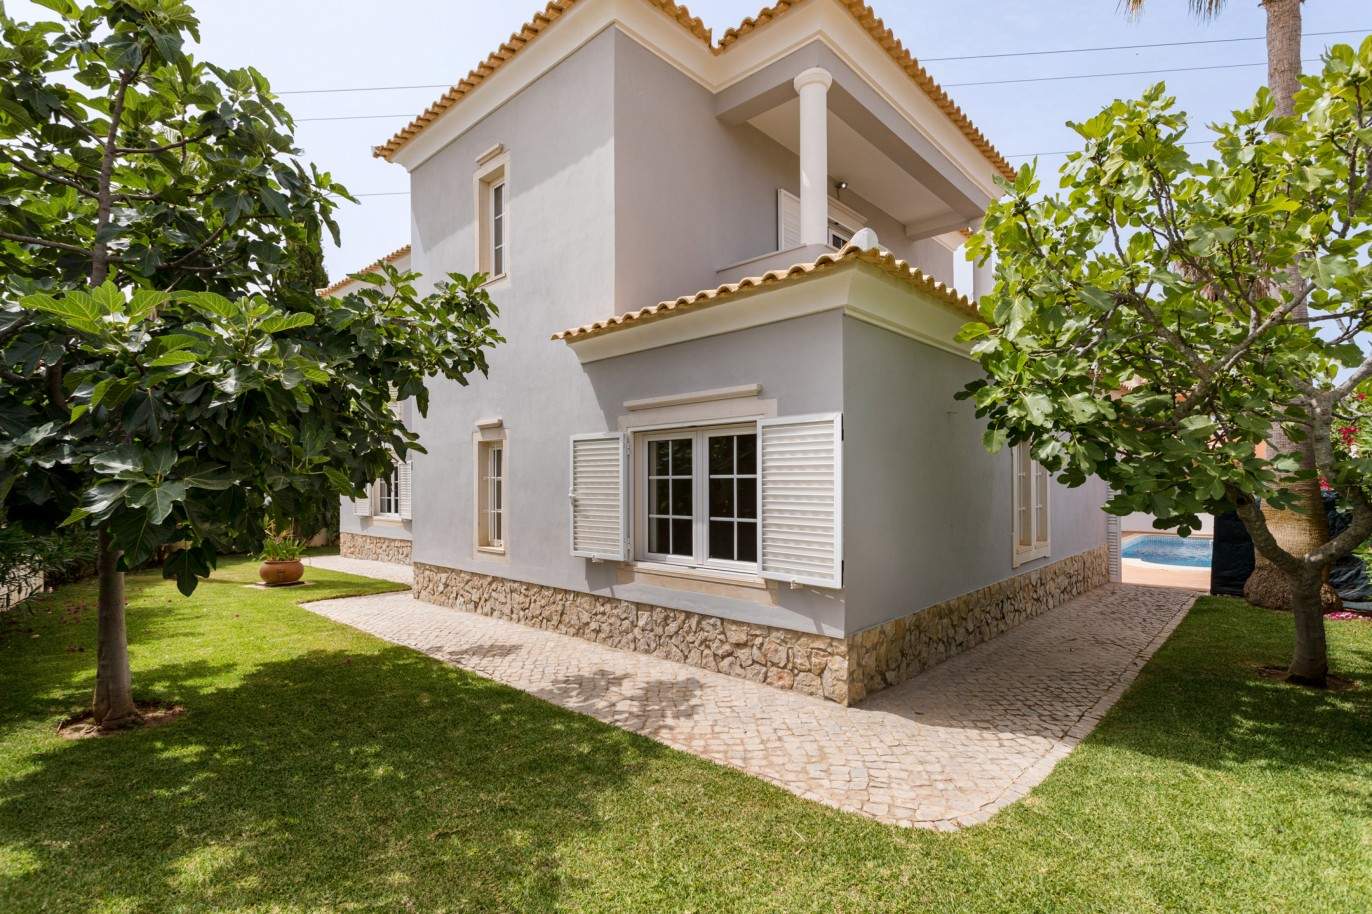 4 Bedroom Villa with swimming pool, for sale in Quarteira, Algarve_201733